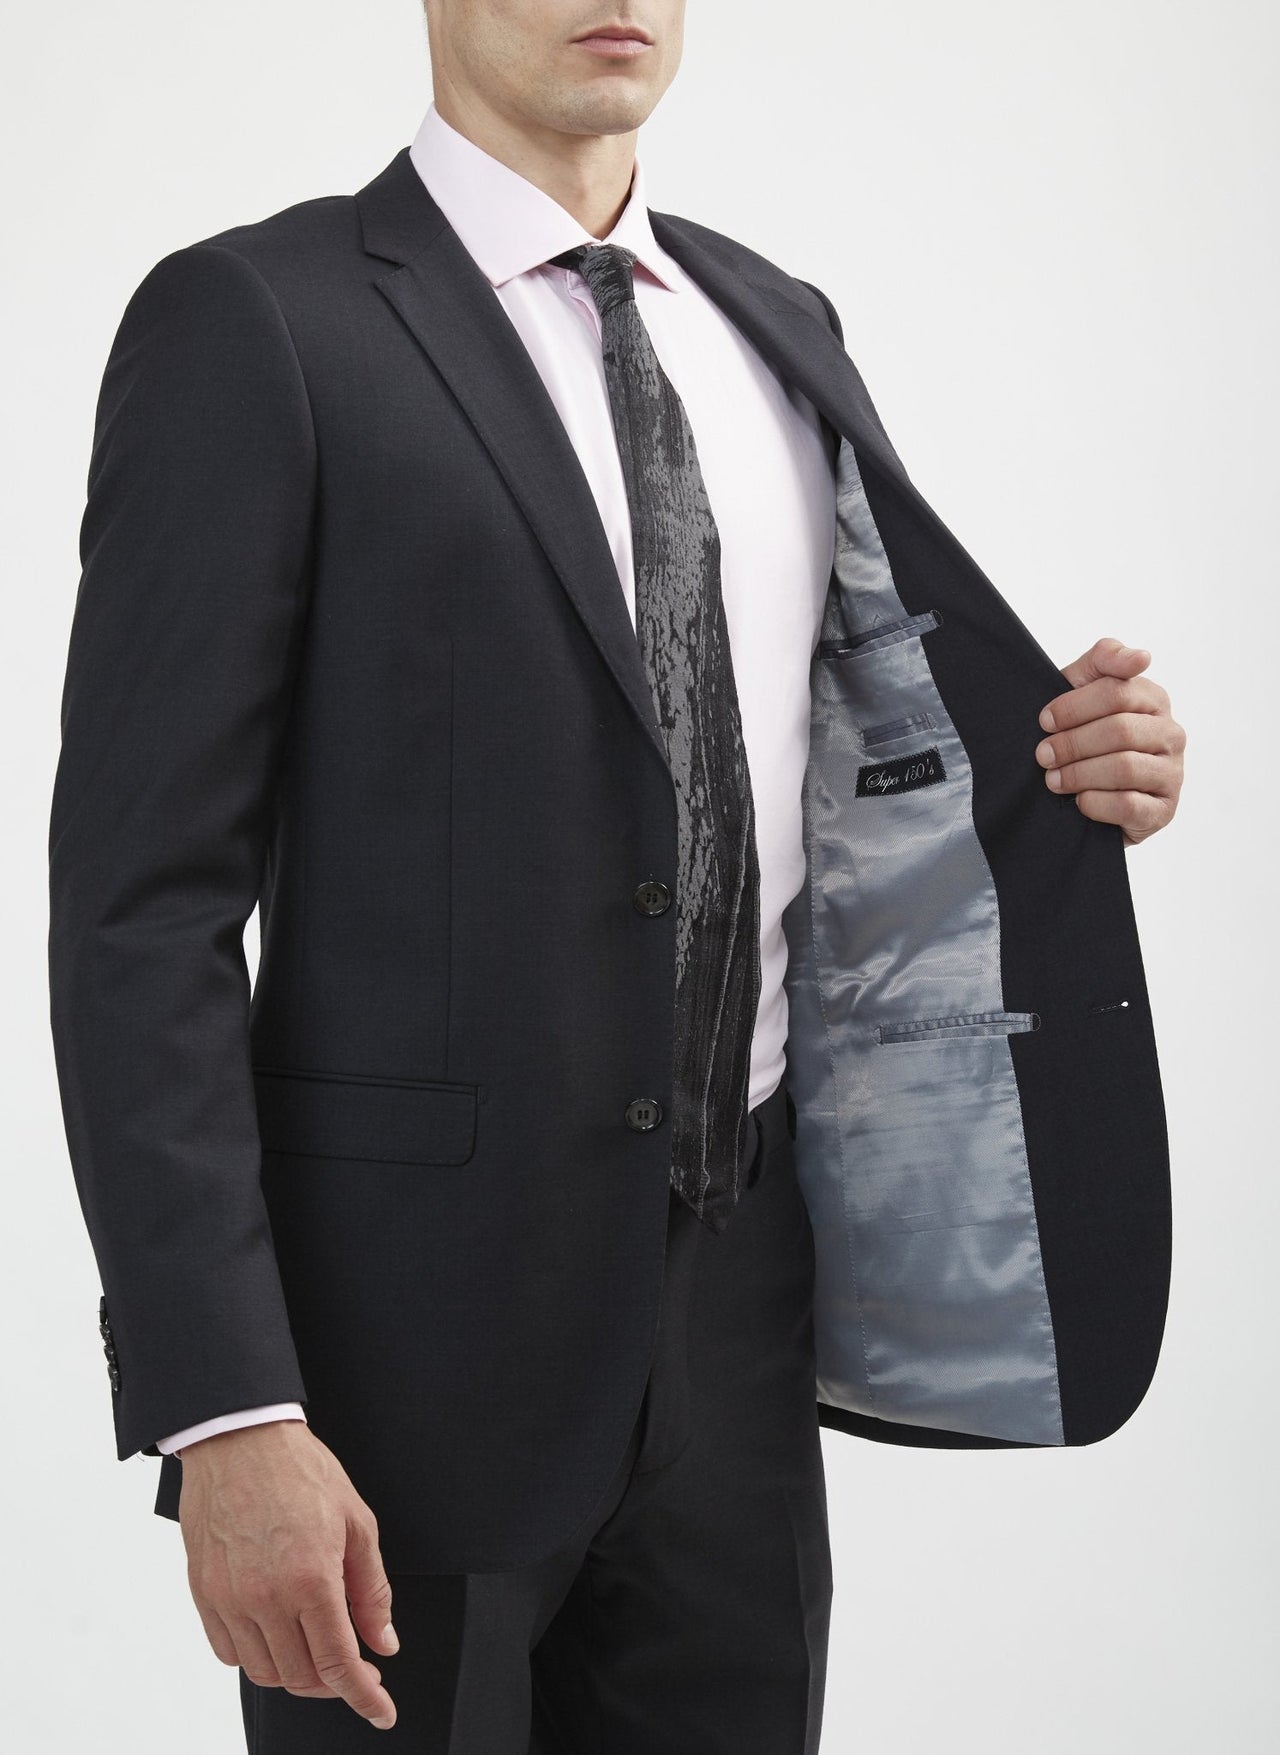 Black Wool Suit with Gray Long Coat